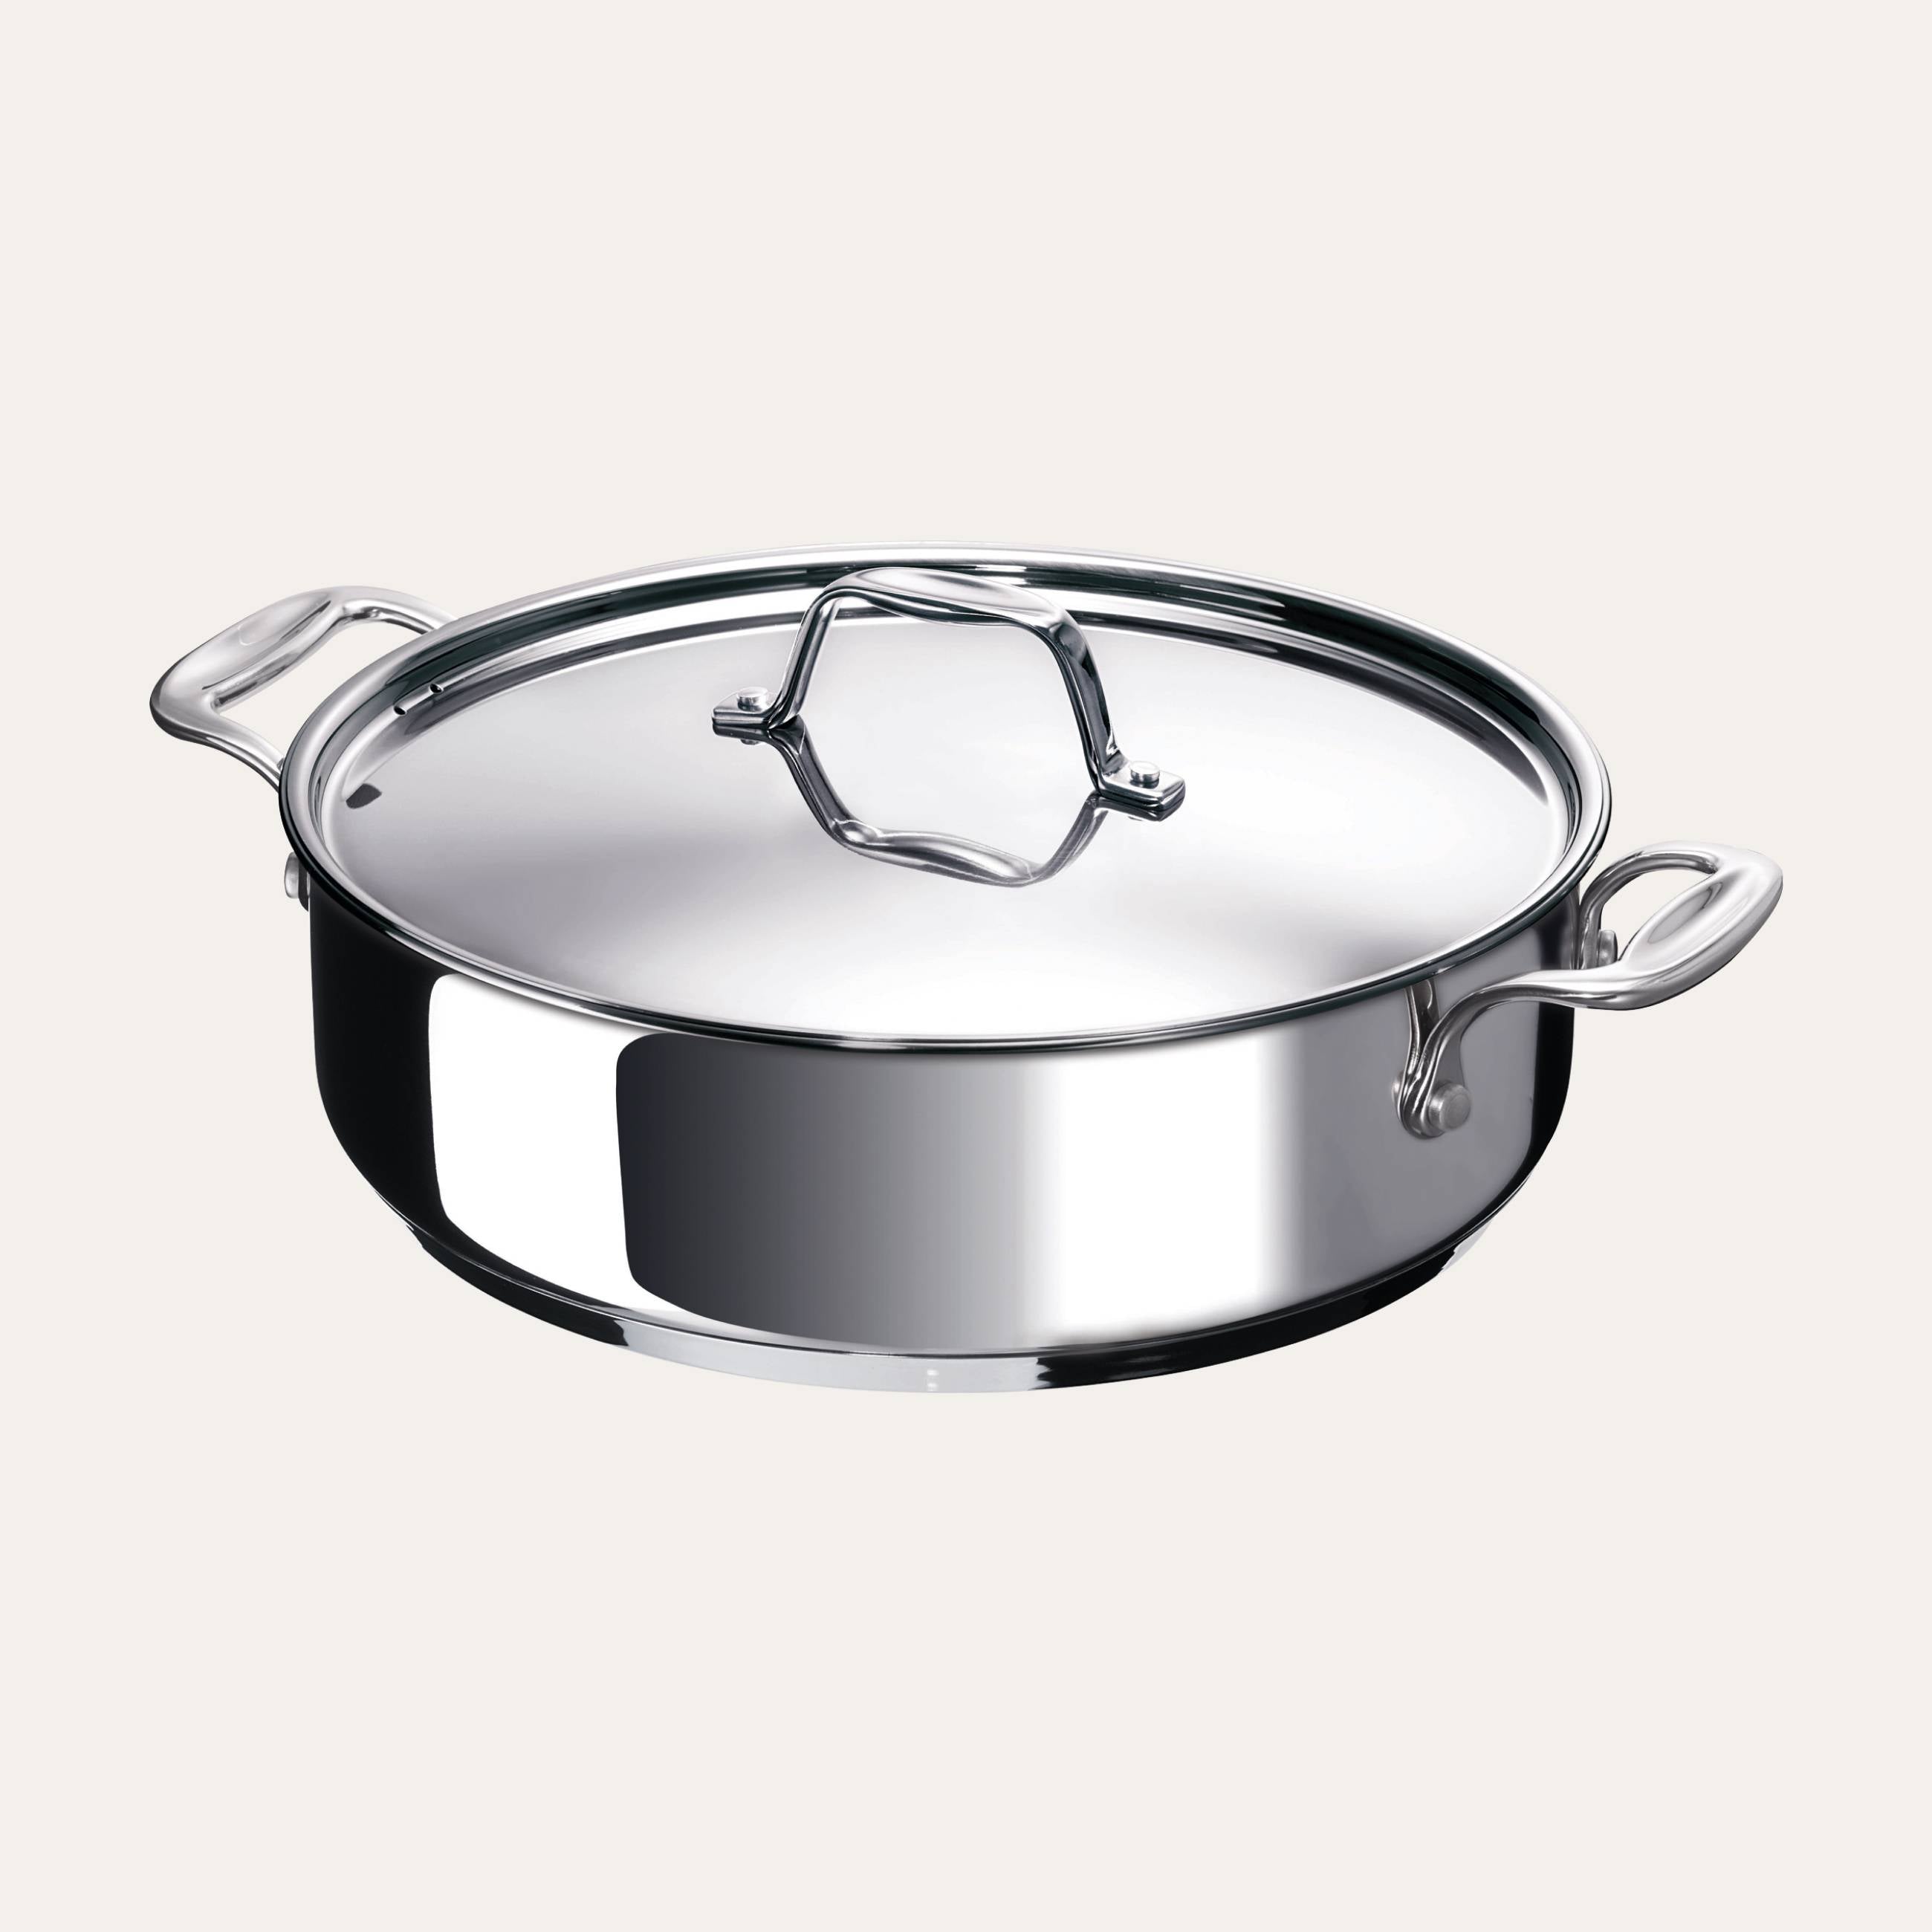 Alva 2.1 qt. Stainless Steel with Lid 100517